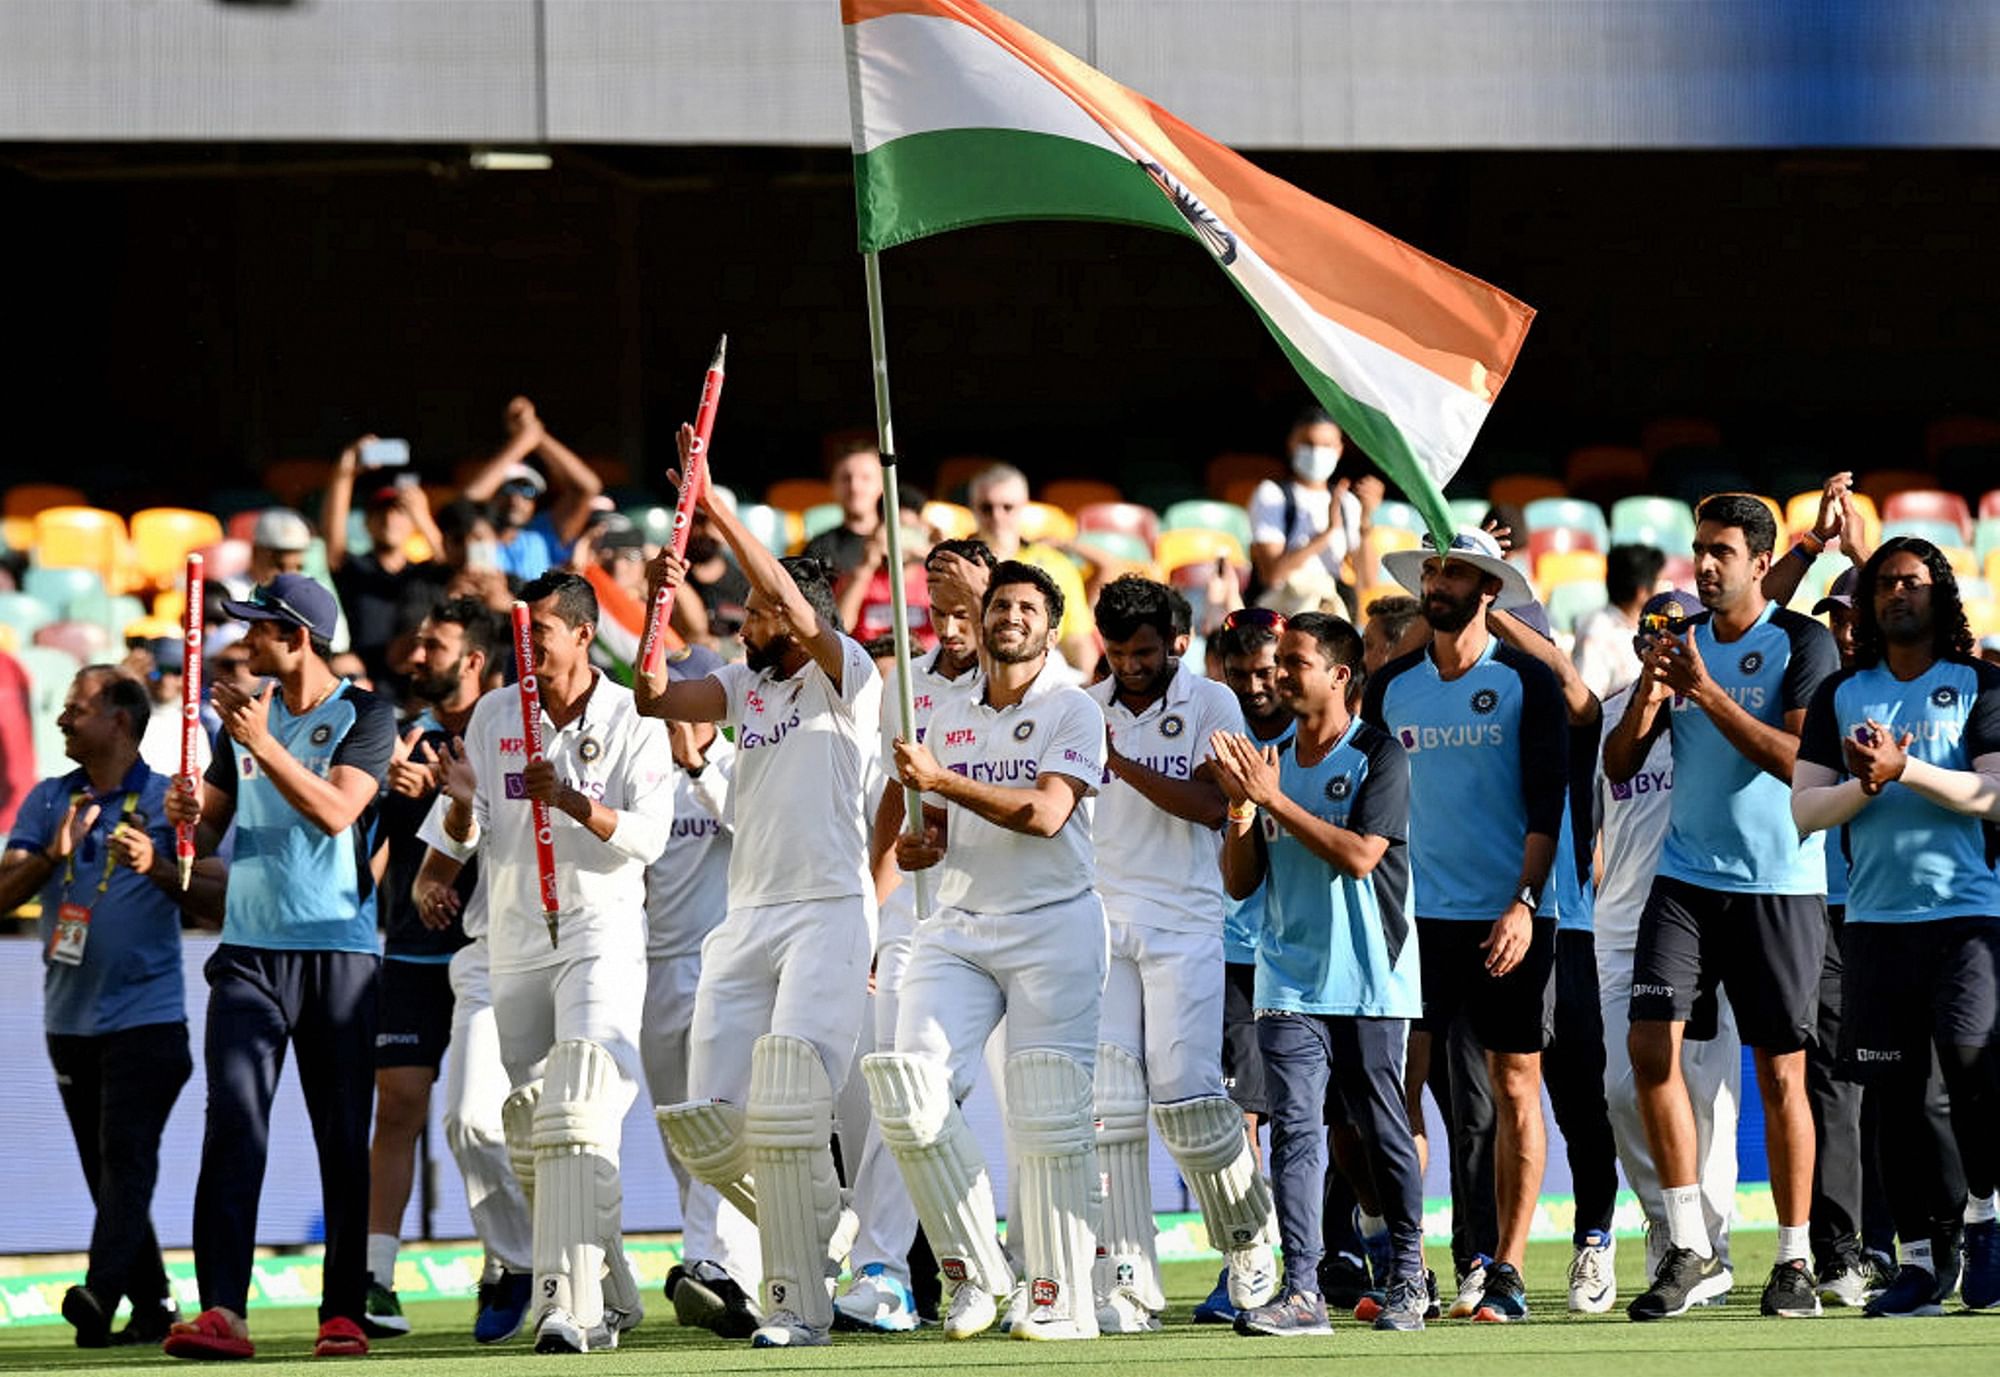 Brisbane: Indian players celebrate after defeating Australia by three wickets on the final day of the fourth cricket test match at the Gabba, Brisbane, Australia, Tuesday, Jan. 19, 2021. India won the four test series 2-1.